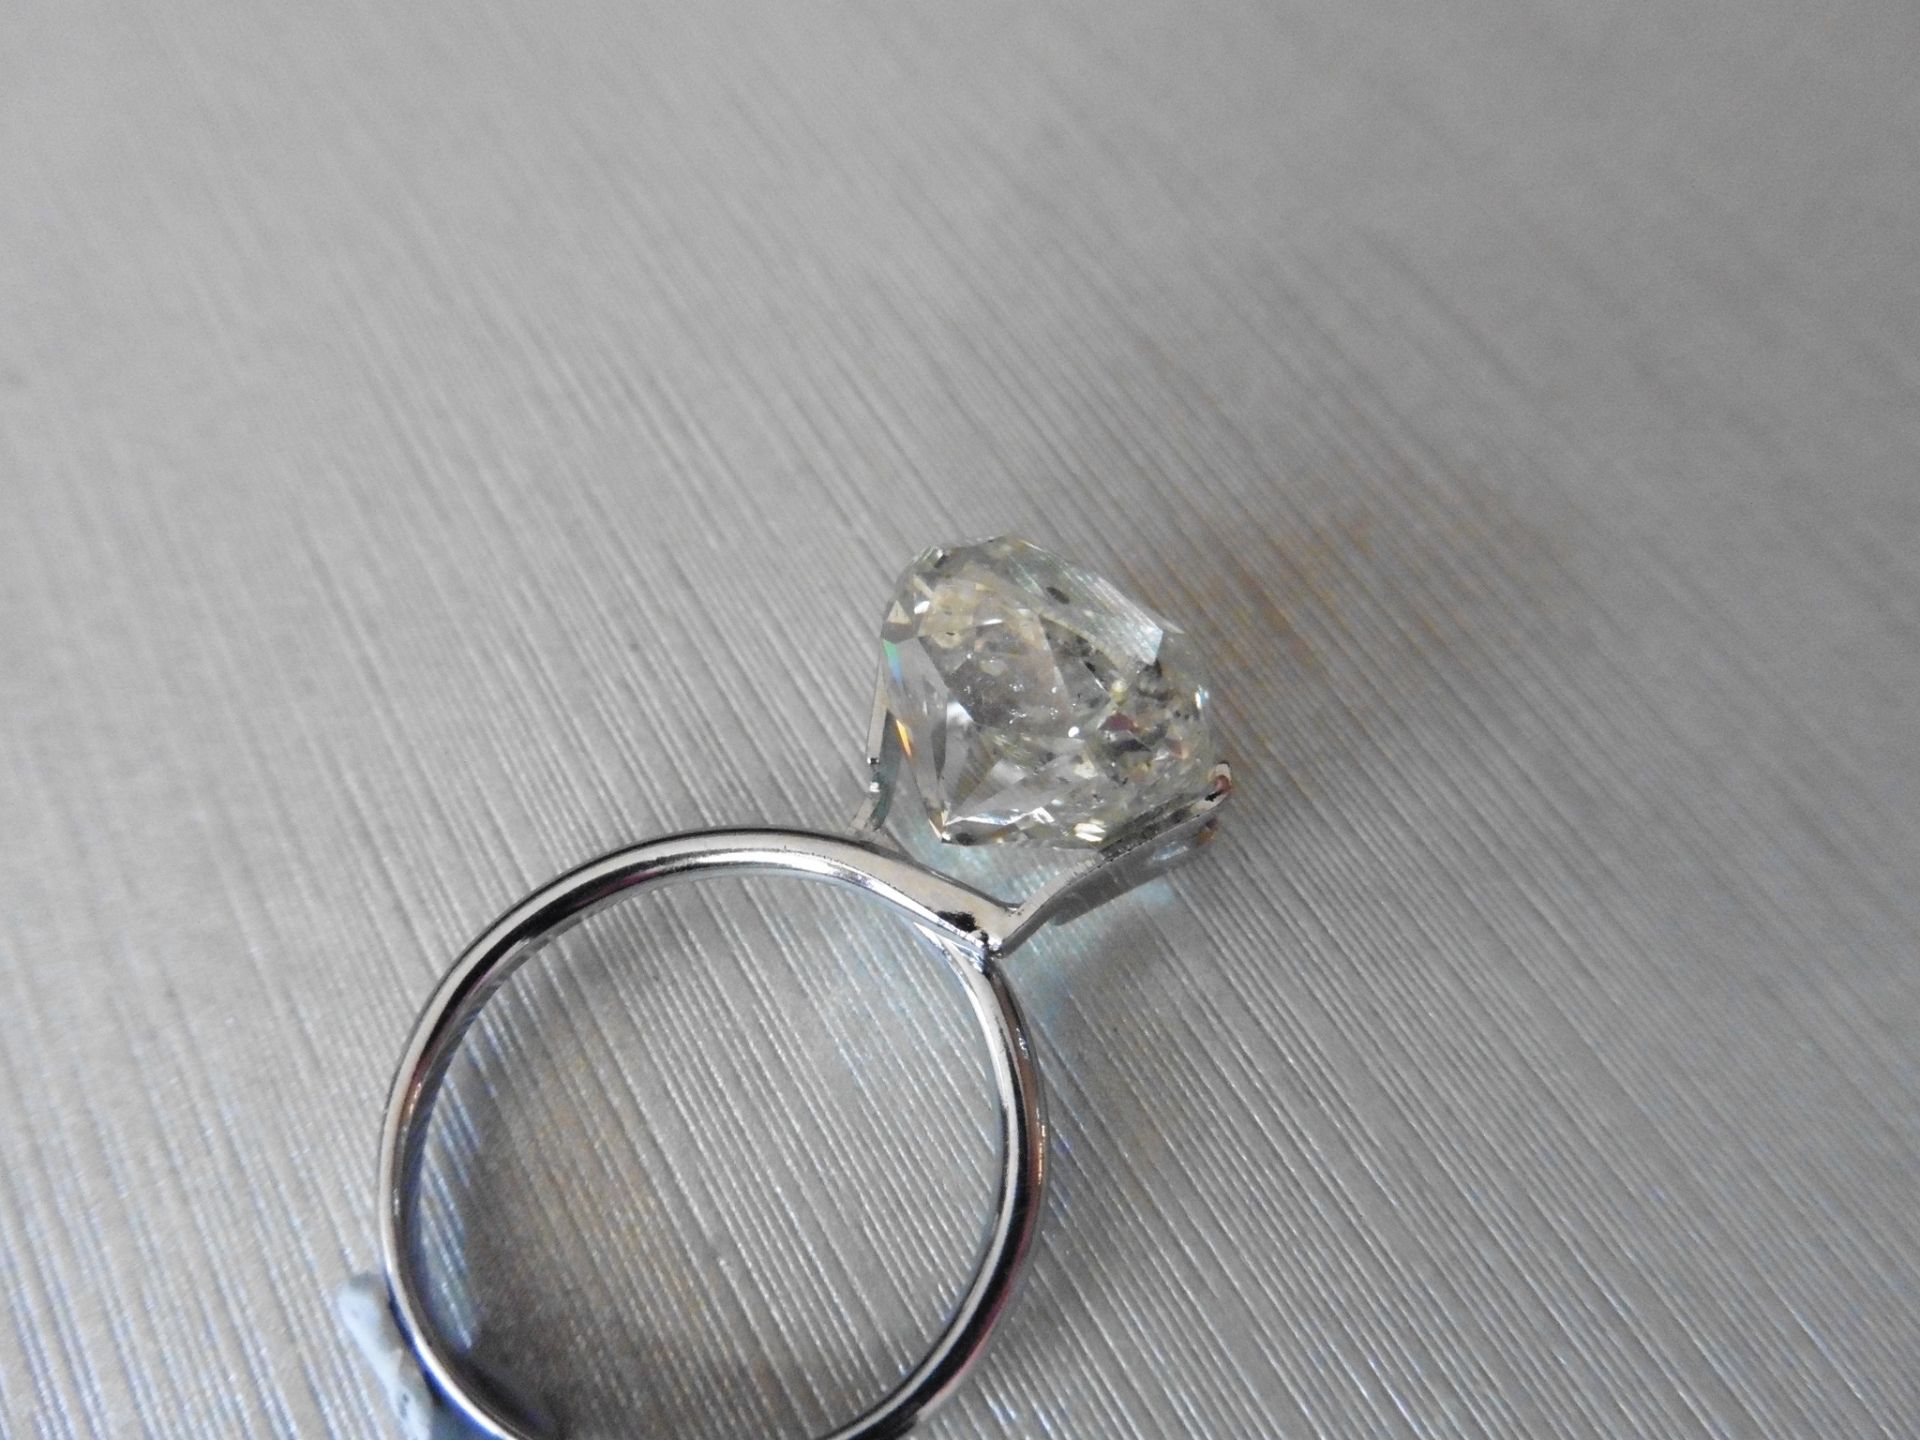 10.10ct single old cut cushion diamond , K colour SI2 clarity. Suitable for mounting in a ring or - Image 4 of 5